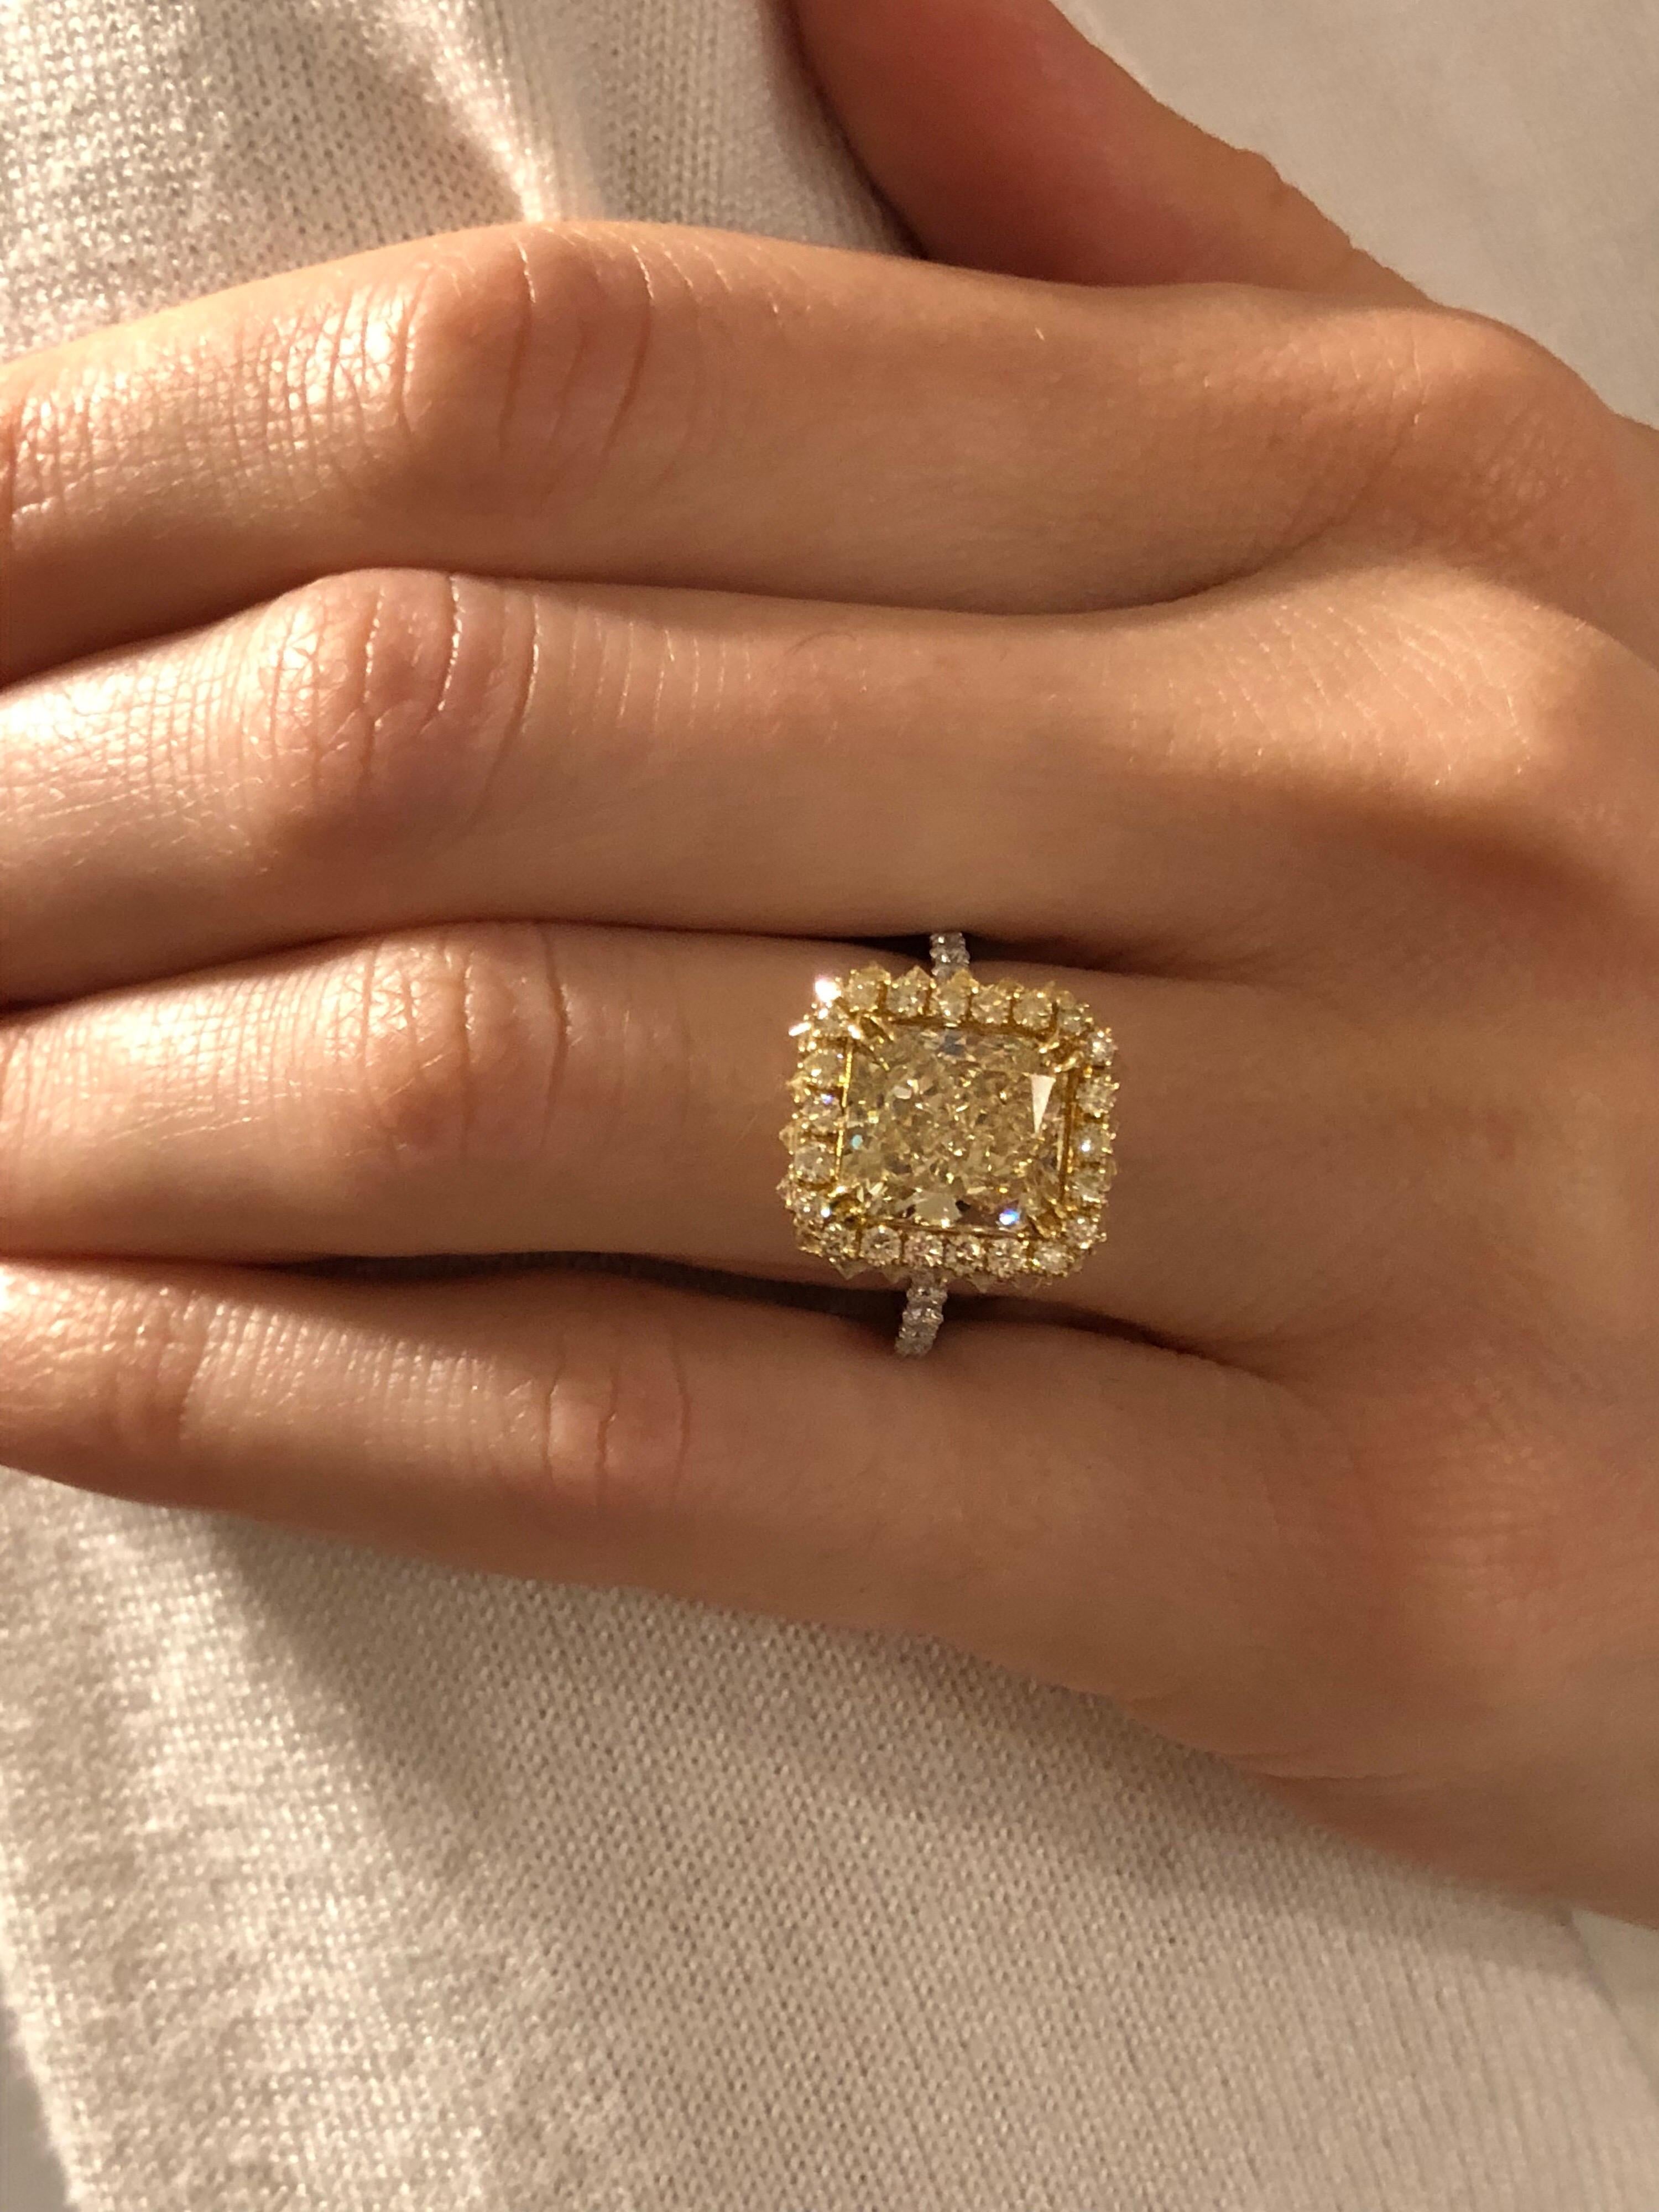 Fancy Light Yellow Diamond Ring 3.78 Carat Radiant Cut GIA Certified For Sale 1